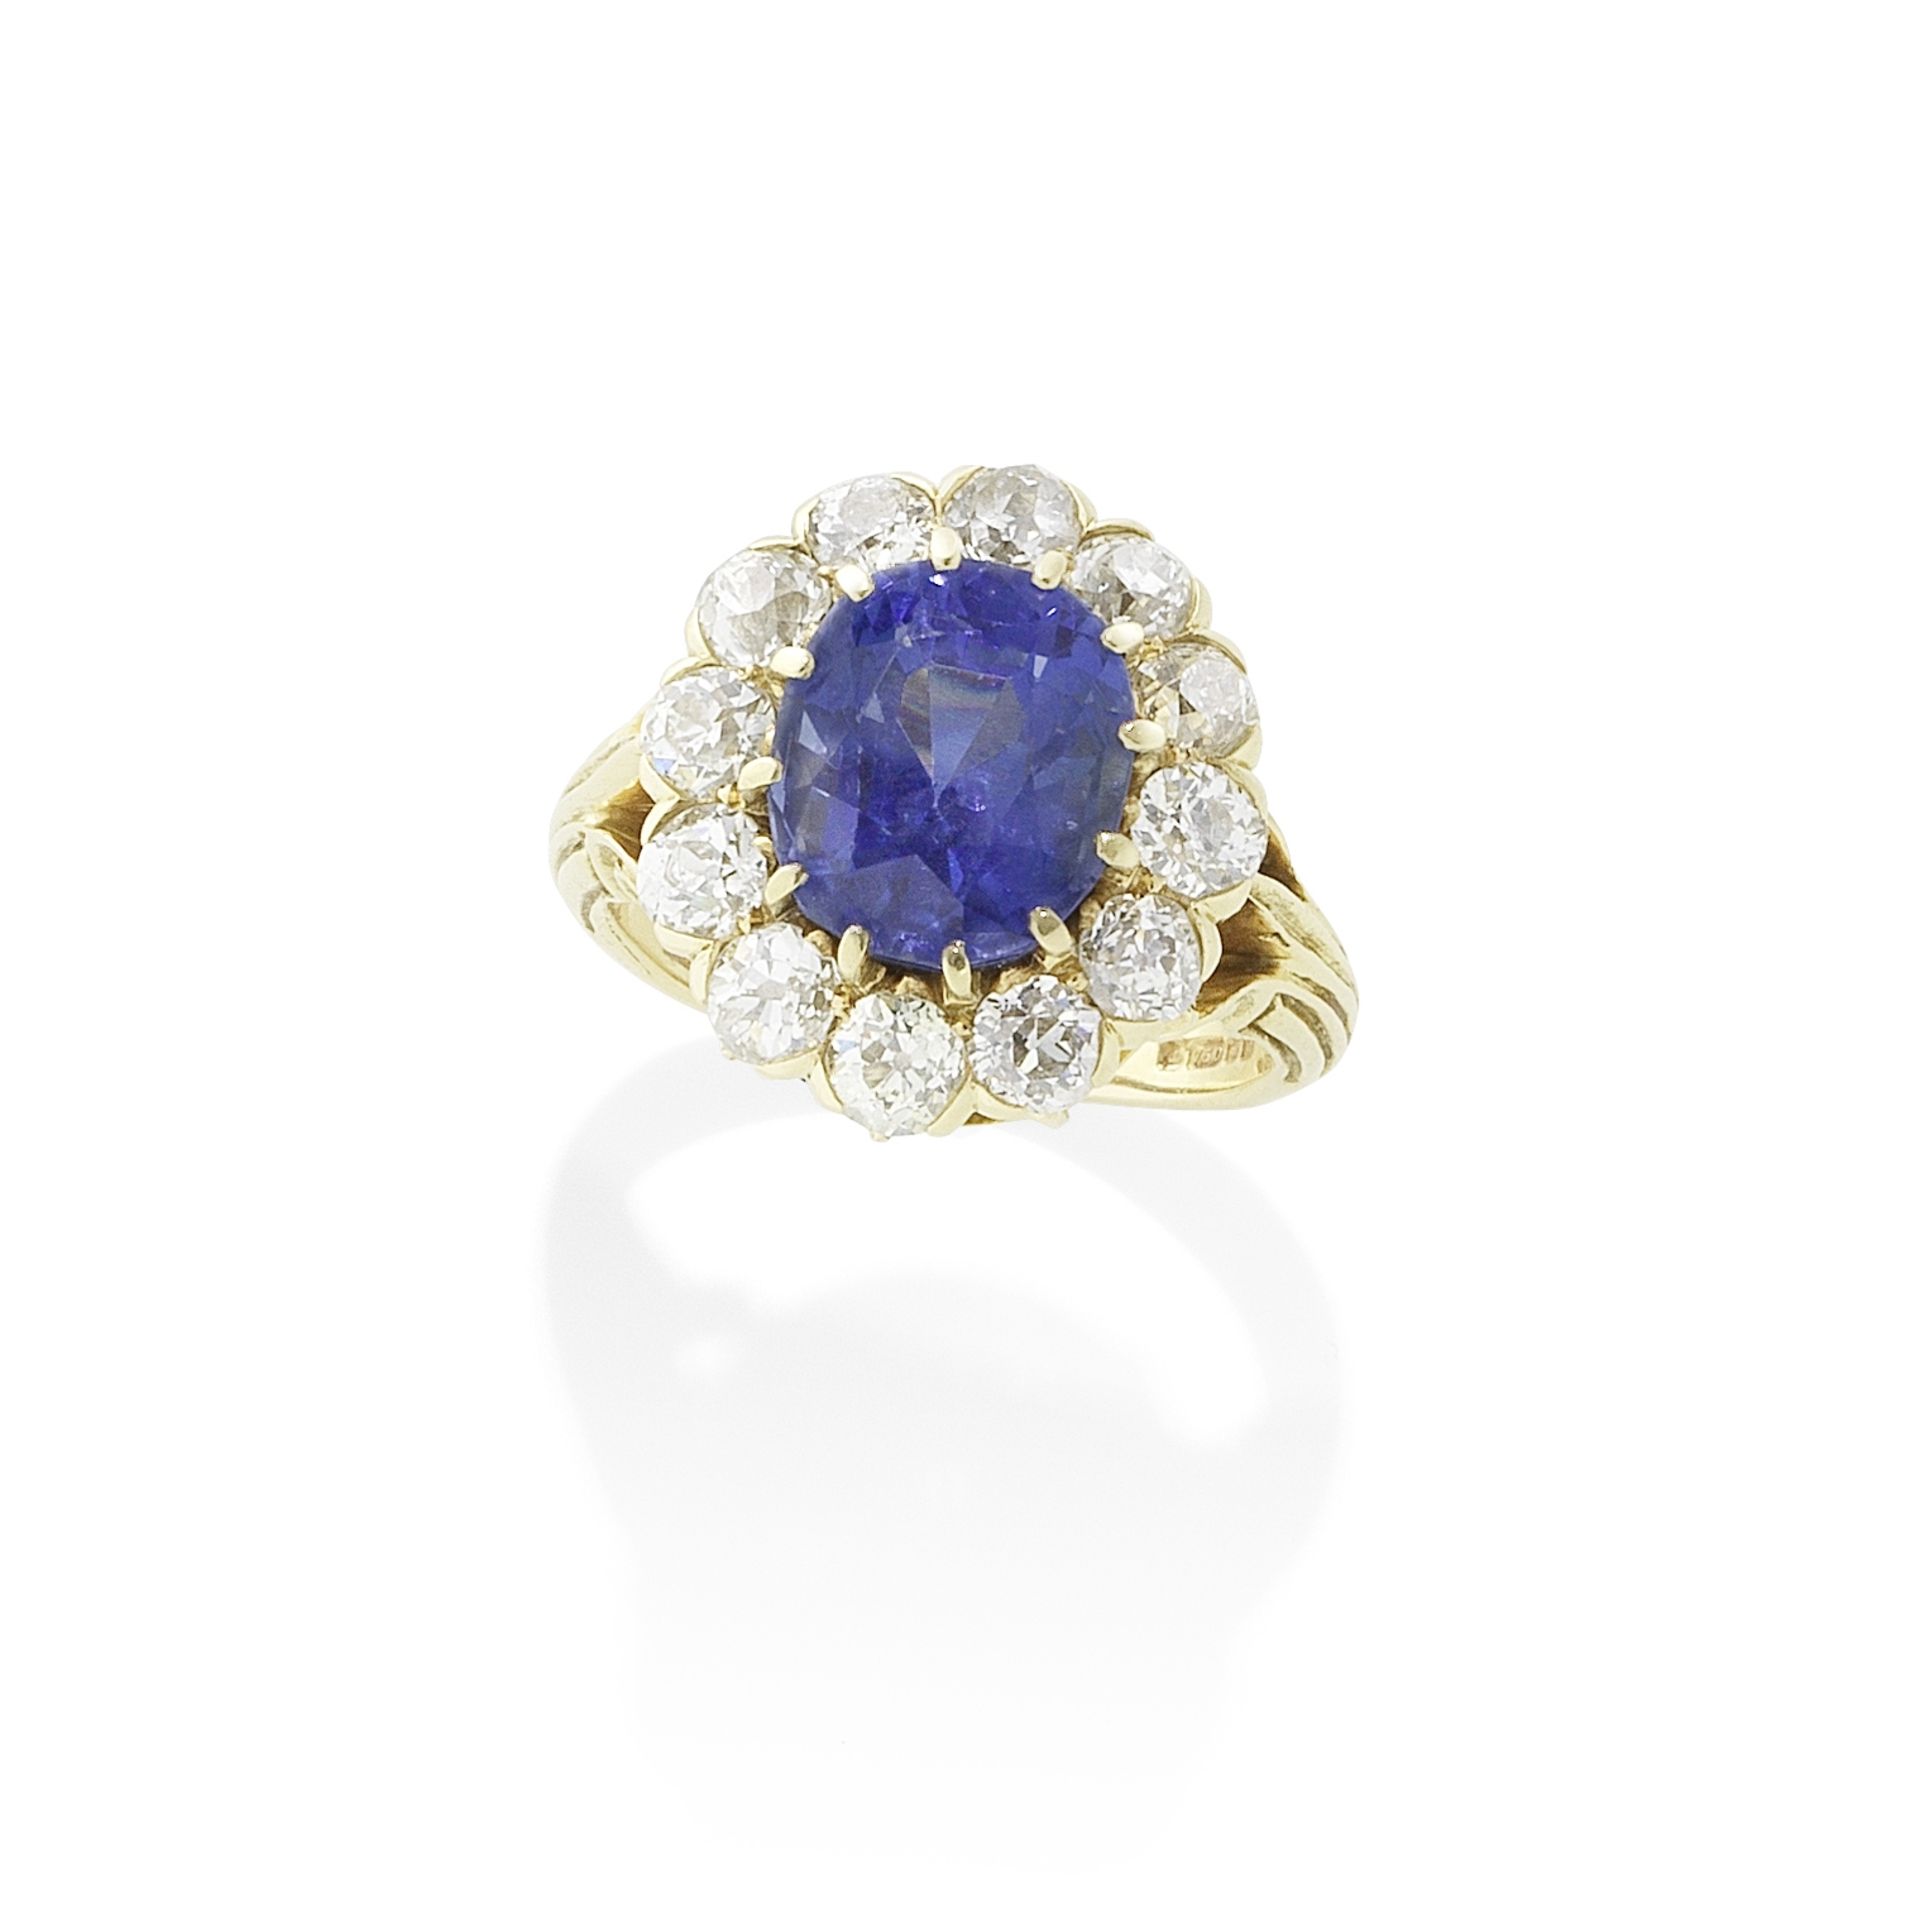 SAPPHIRE AND DIAMOND CLUSTER RING, 19TH CENTURY